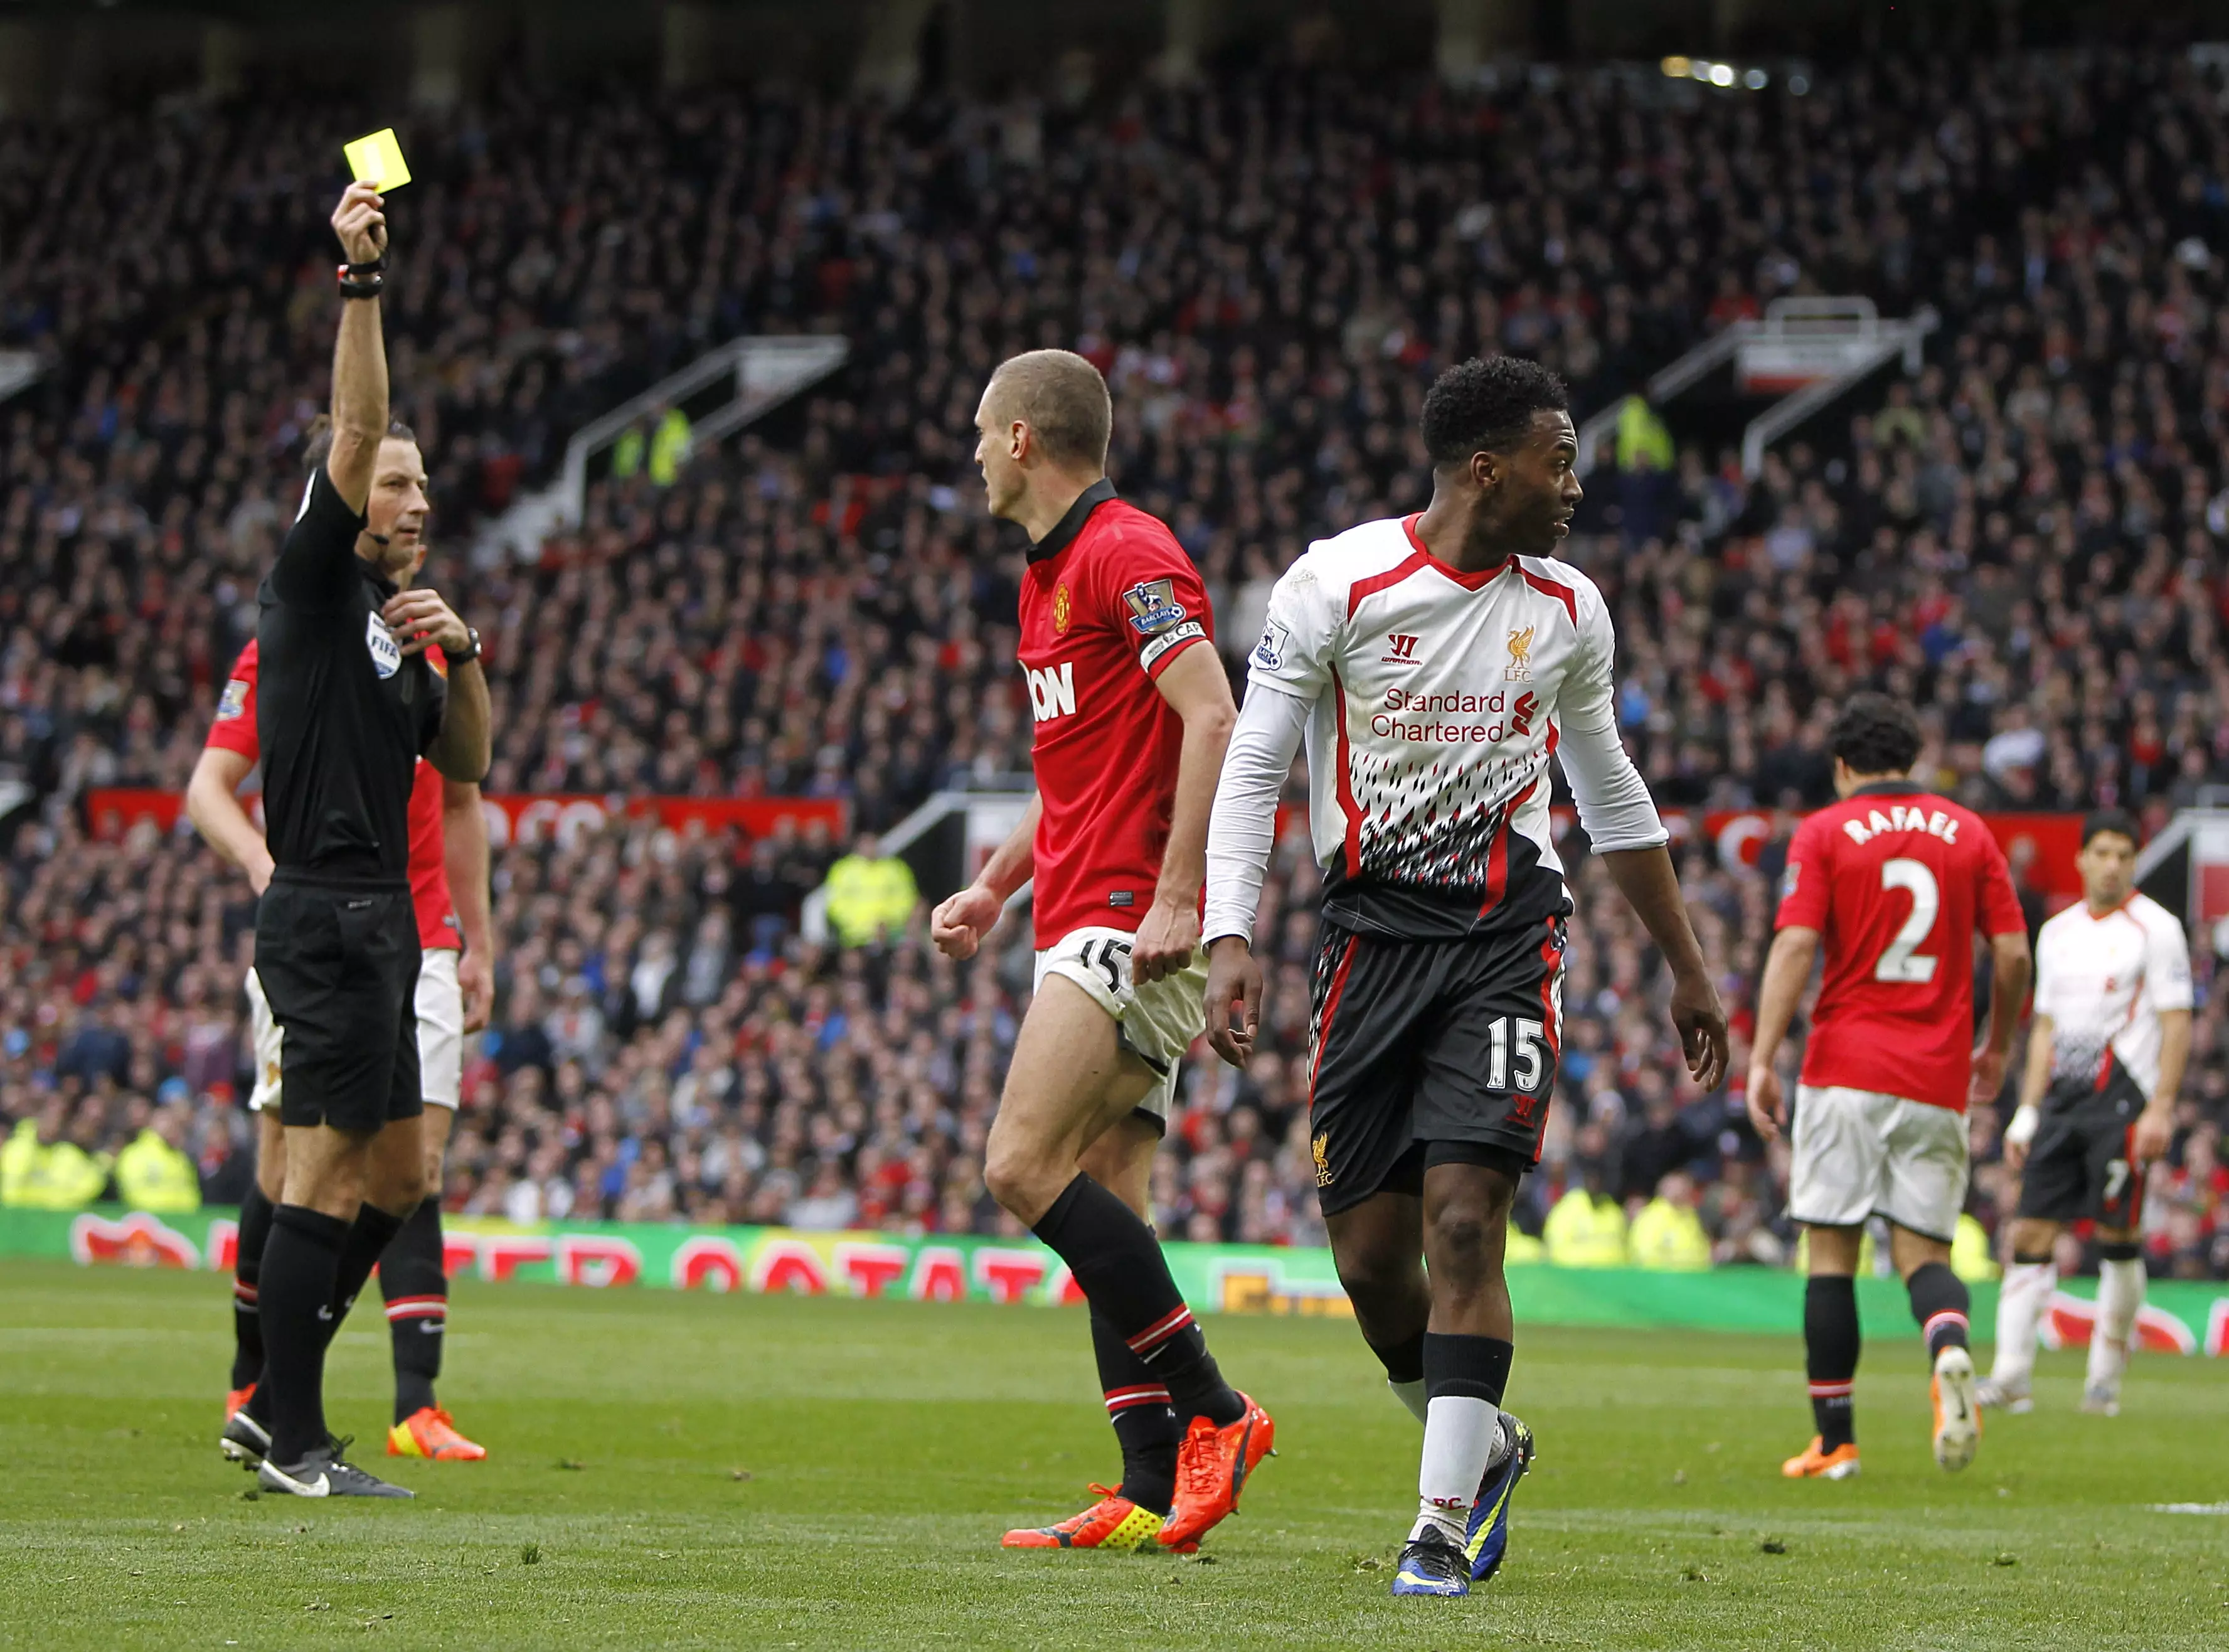 Clattenburg gave three penalties to Liverpool at Old Trafford in one match in 2014. Image: PA Images